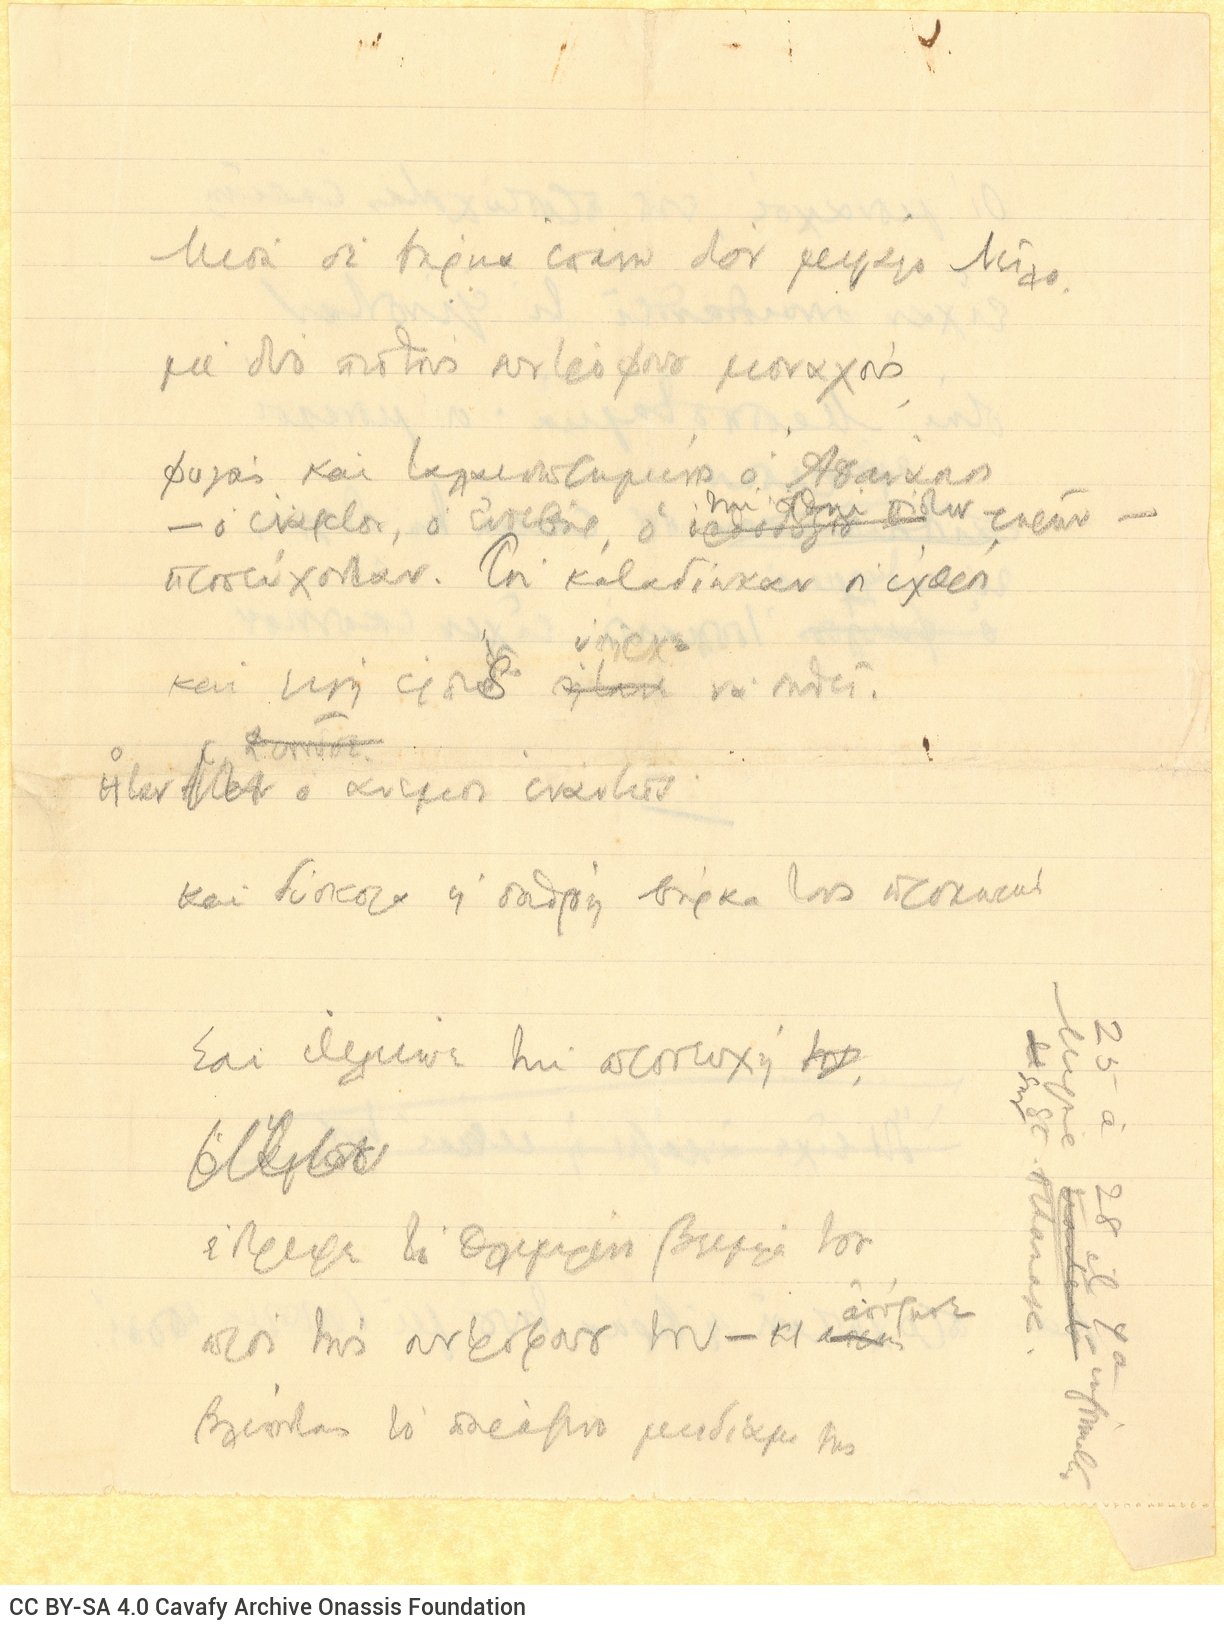 "Handwritten draft of the poem ""Athanasius"" on both sides of a ruled sheet.
On one side of a second sheet an abbr